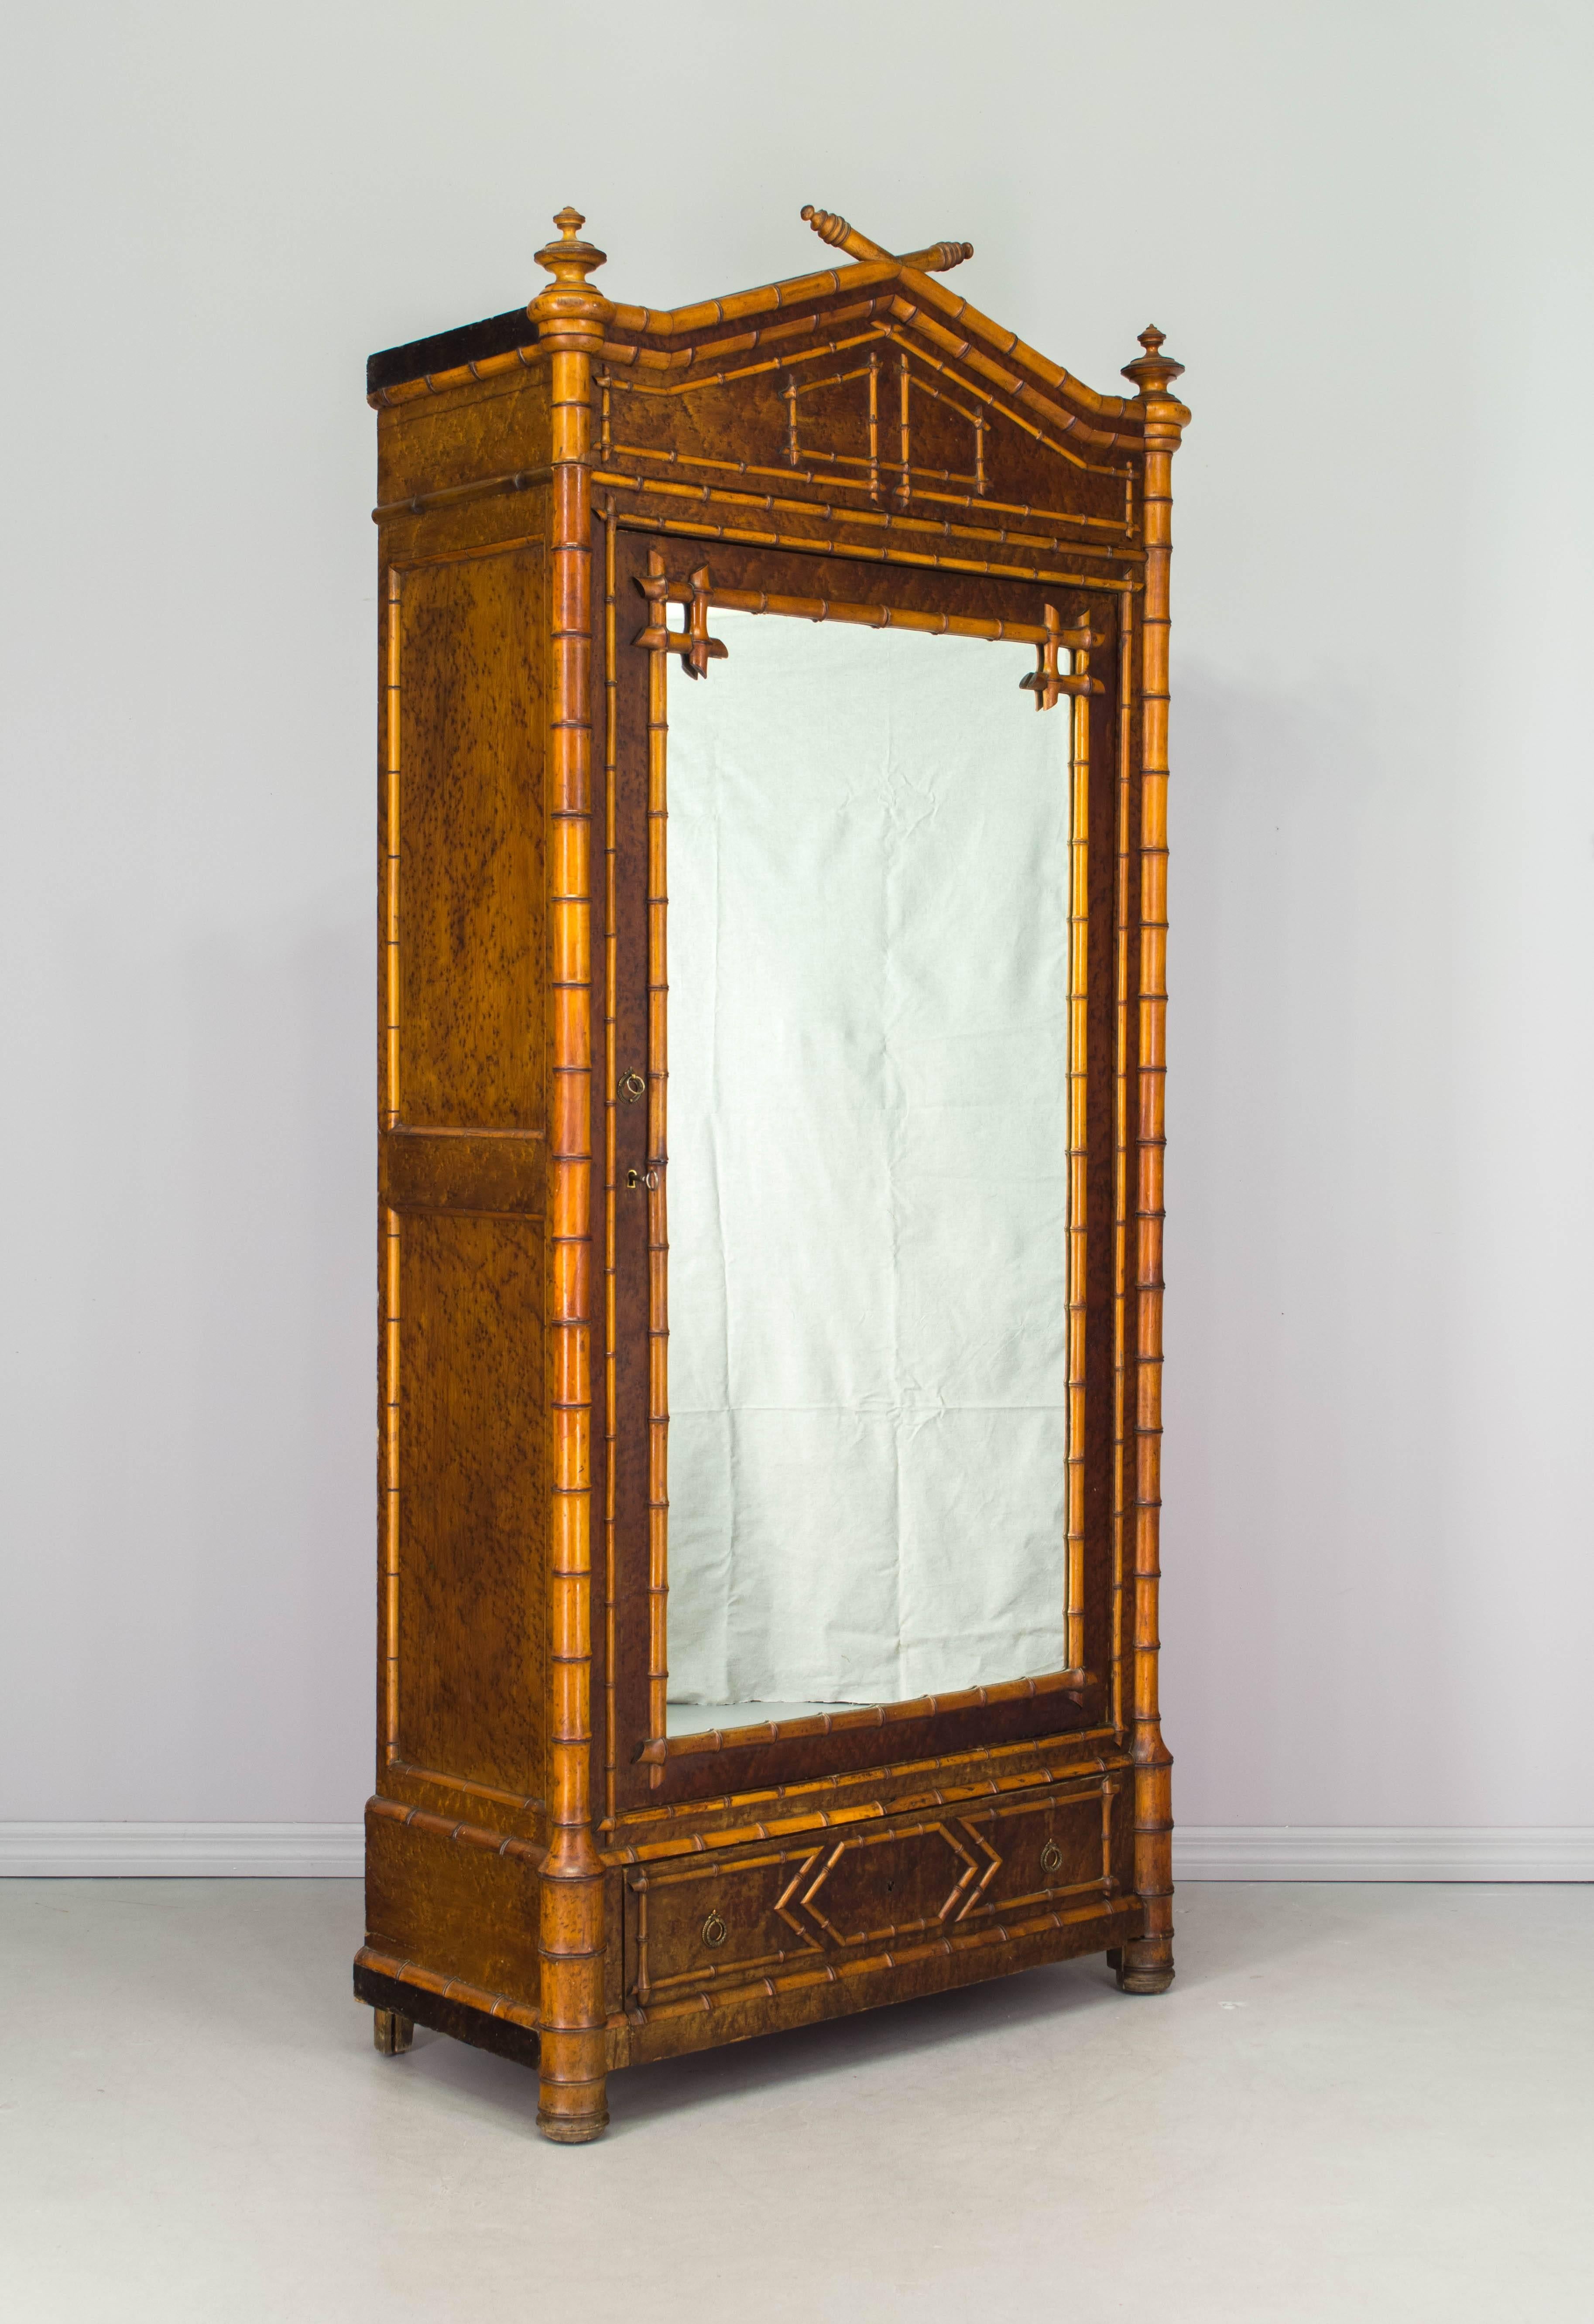 19th century French faux bamboo armoire made of solid cherry and bird's-eye maple veneer with oak as a secondary wood. Mirrored door opens to three adjustable shelves. Single dovetailed bottom drawer with ring pulls. Door has working lock and key.